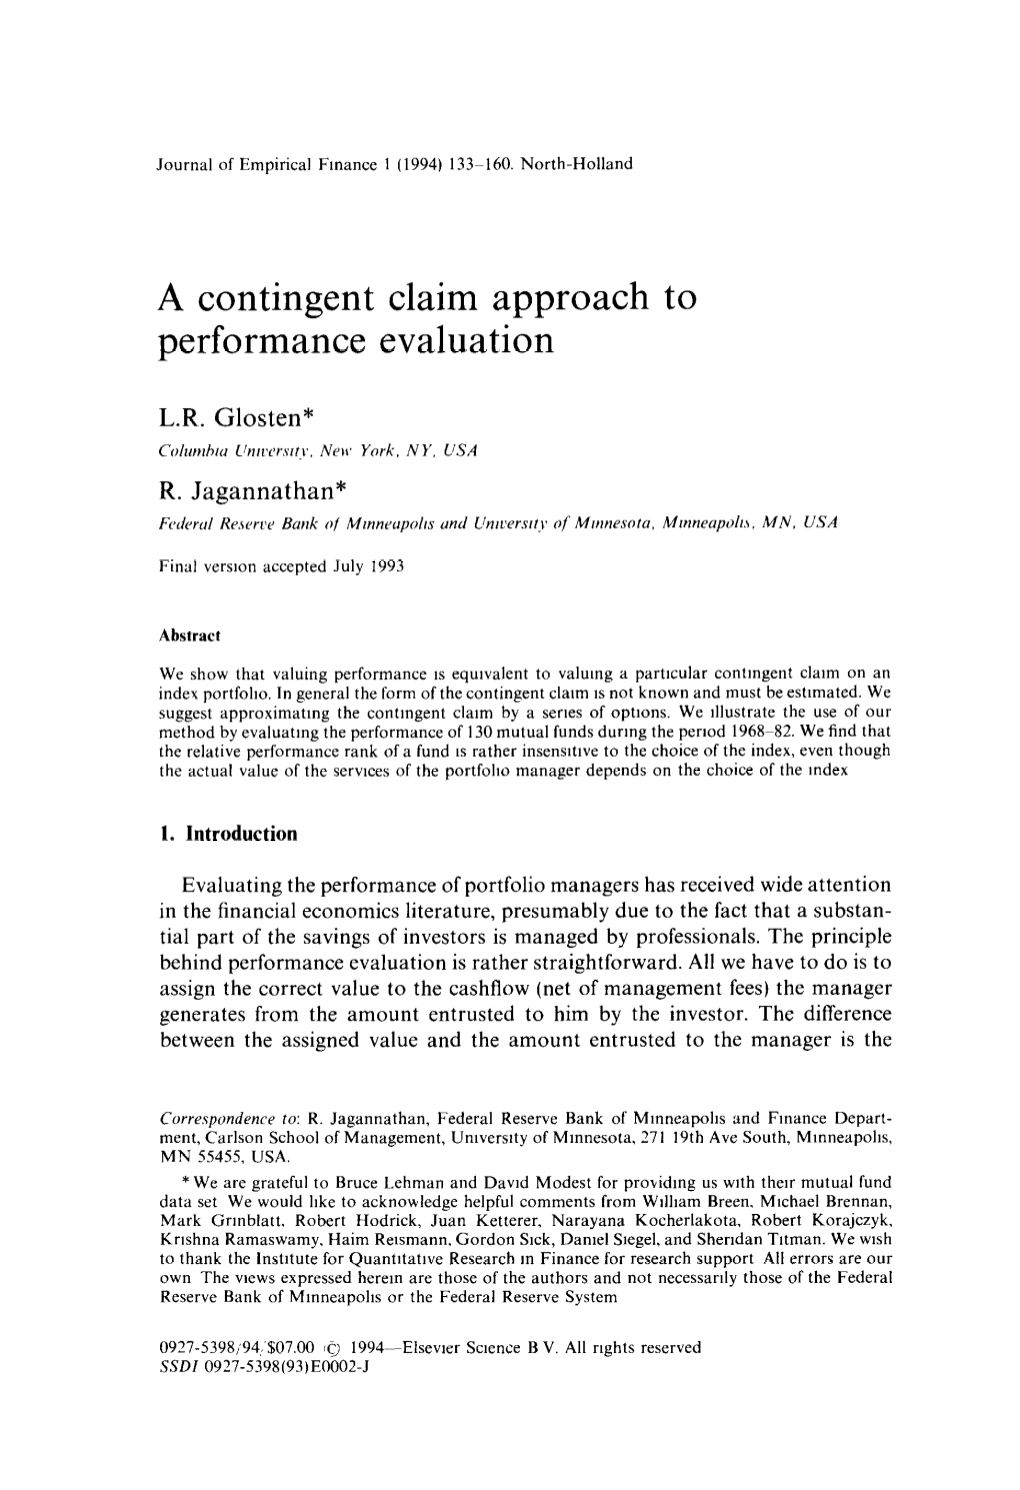 A Contingent Claim Approach to Performance Evaluation